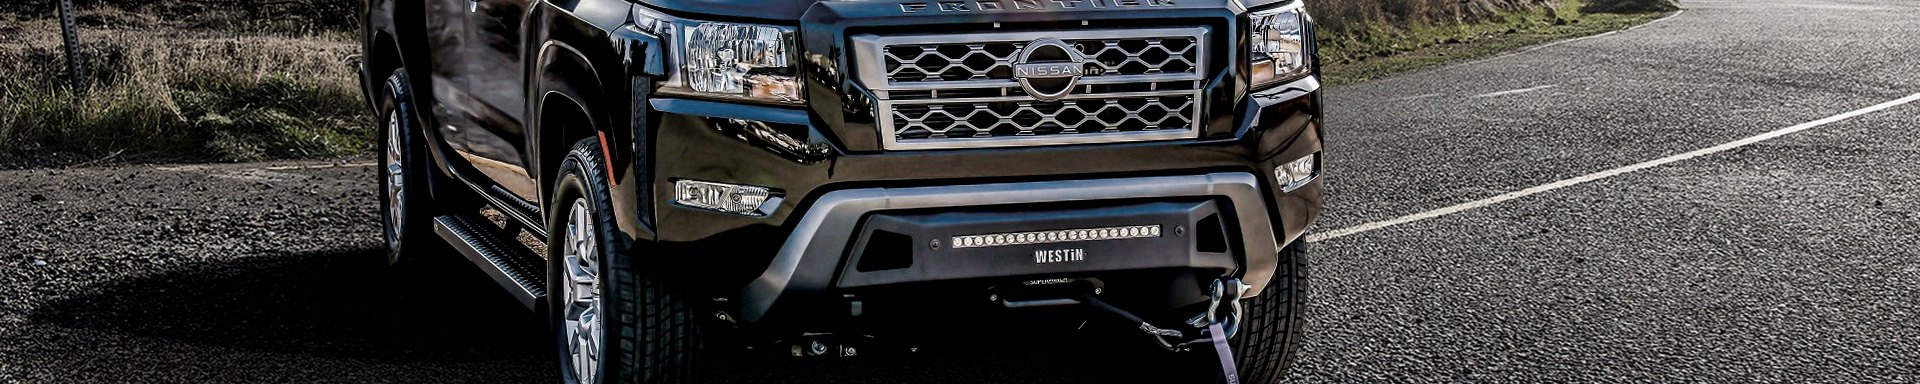 Equip Your Nissan Frontier with New Pro-Series Winch Mount Front Bumper by Westin